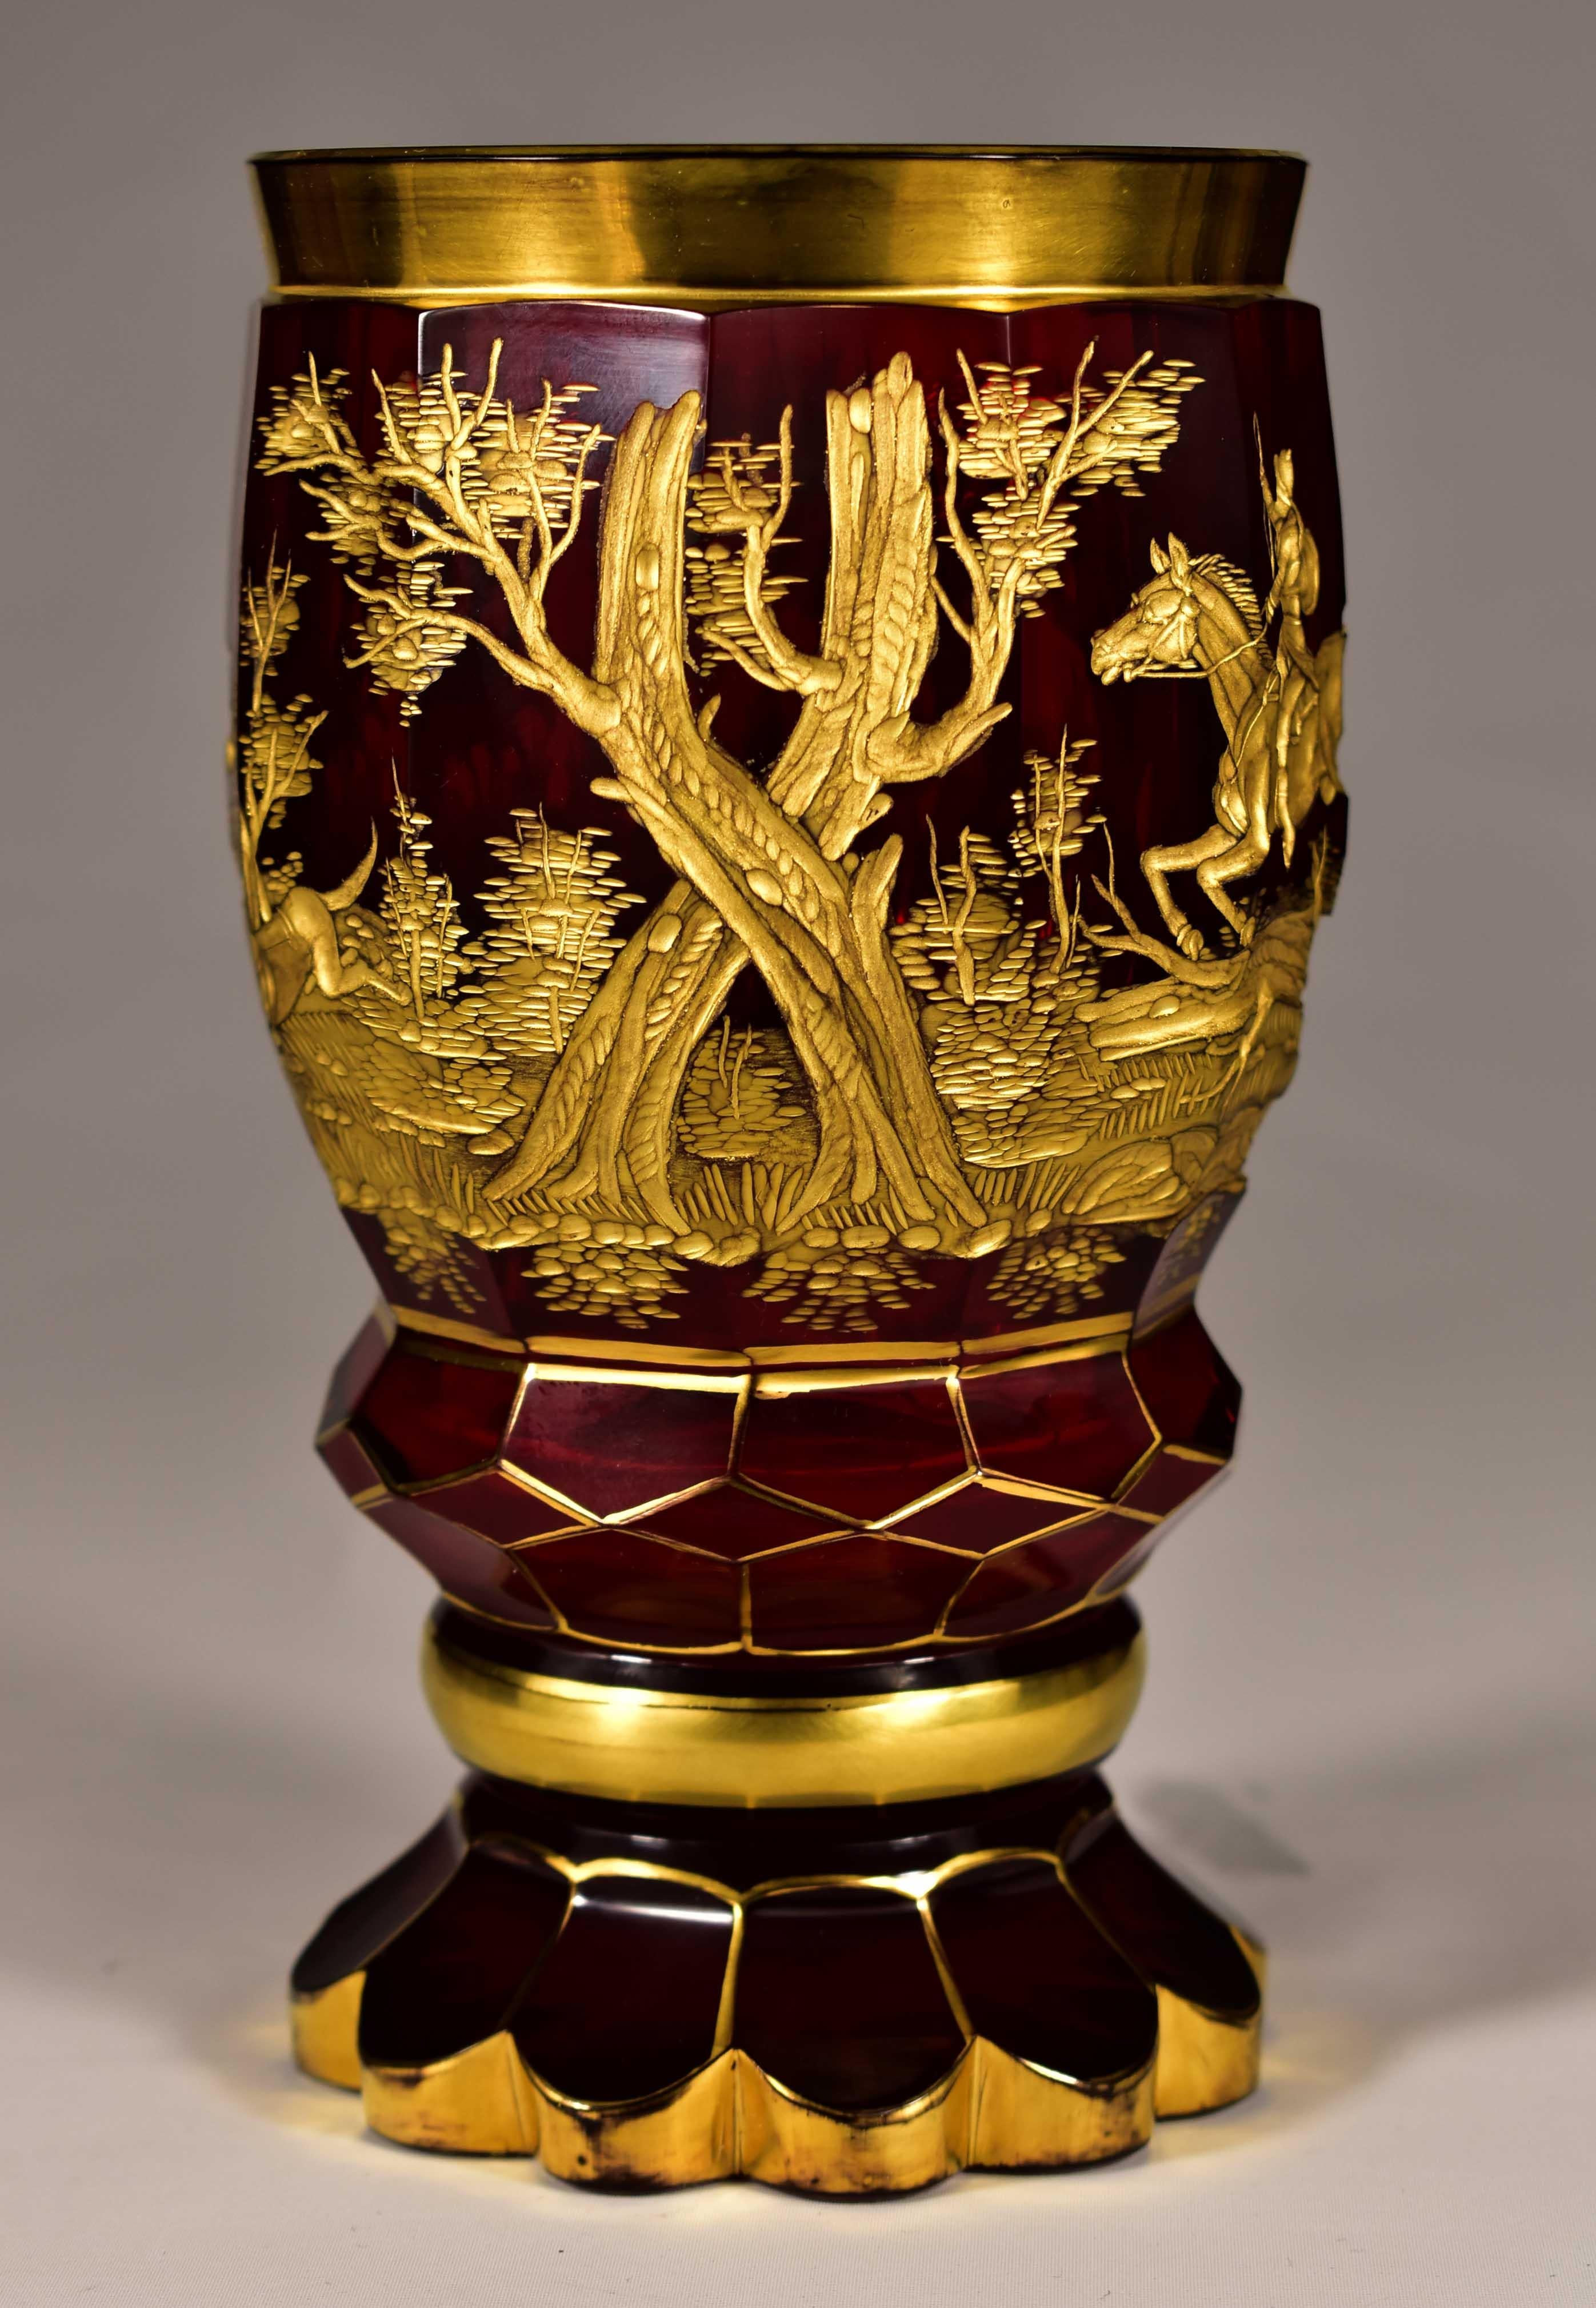 Late 19th Century Ruby Goblet with Gilt Engraving, Hunting Motif, 19-20 century For Sale